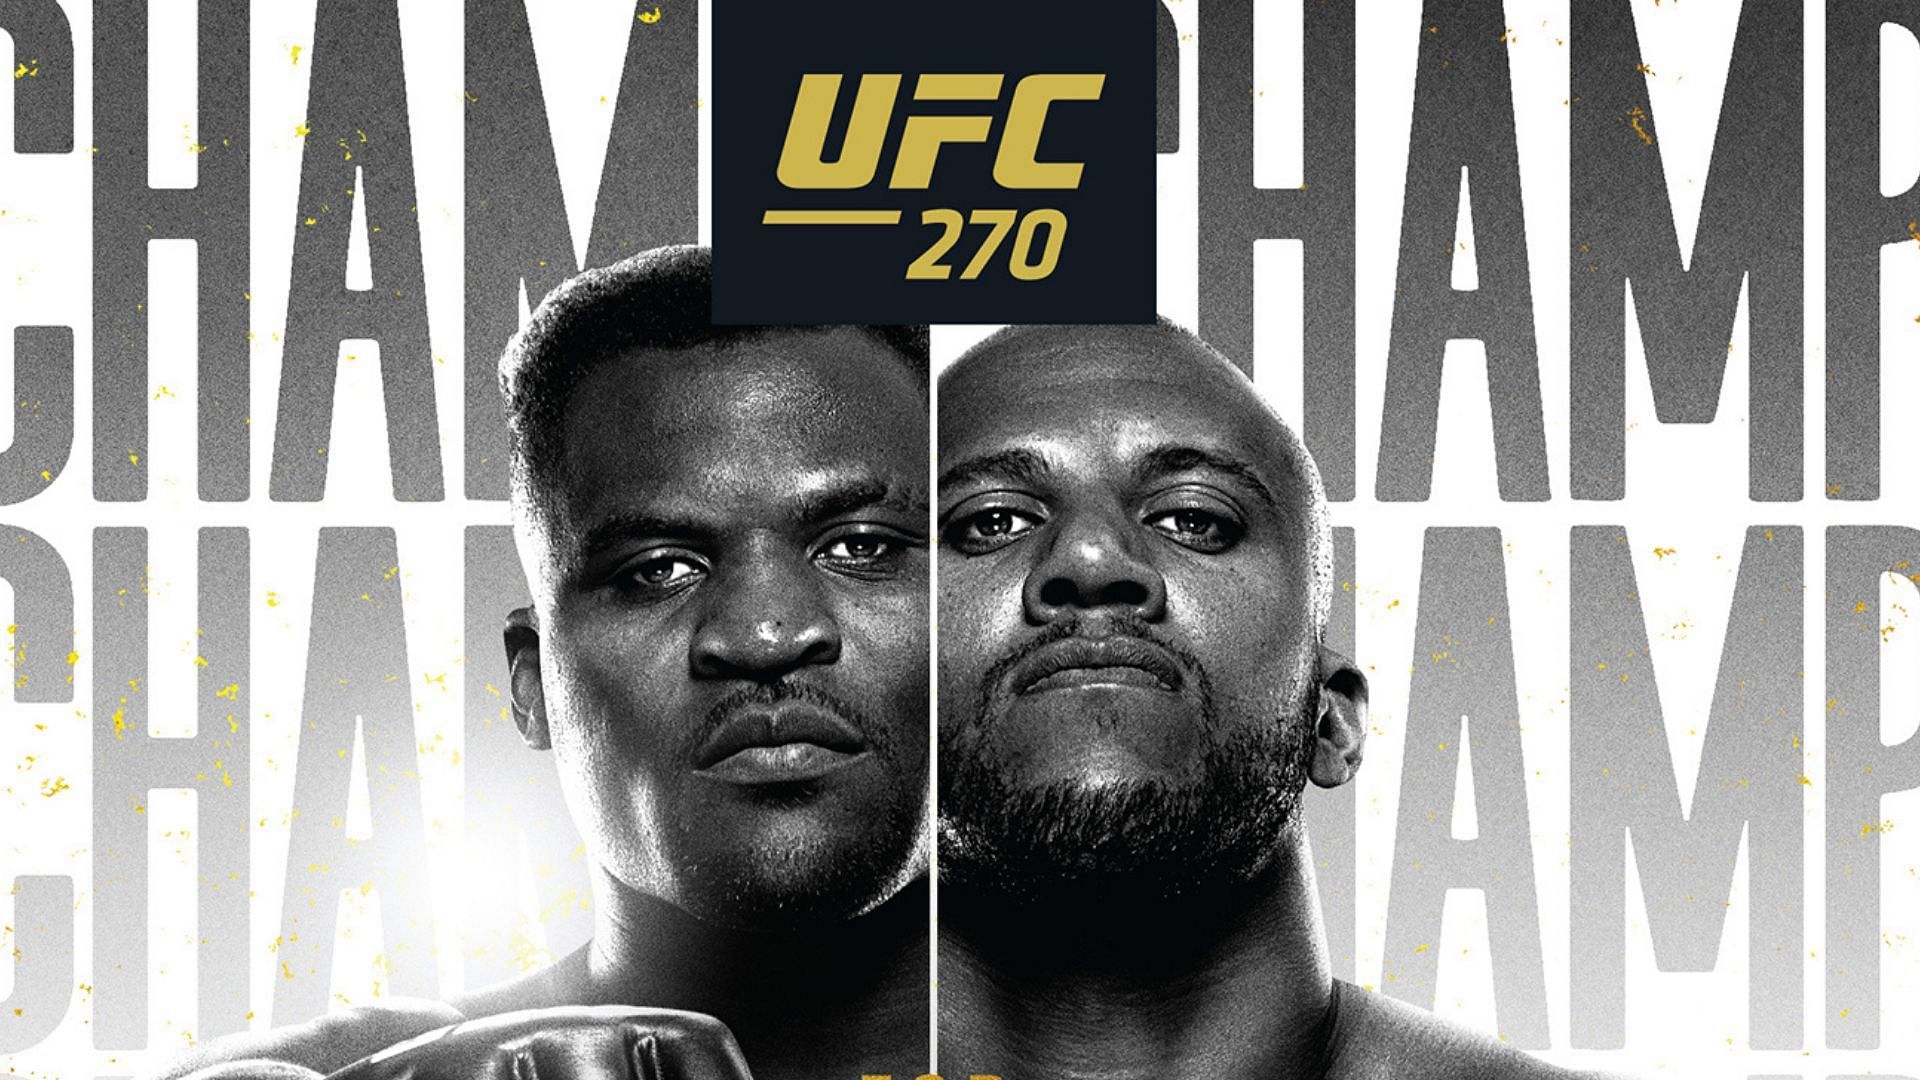 UFC 270 How much will the PPV cost?